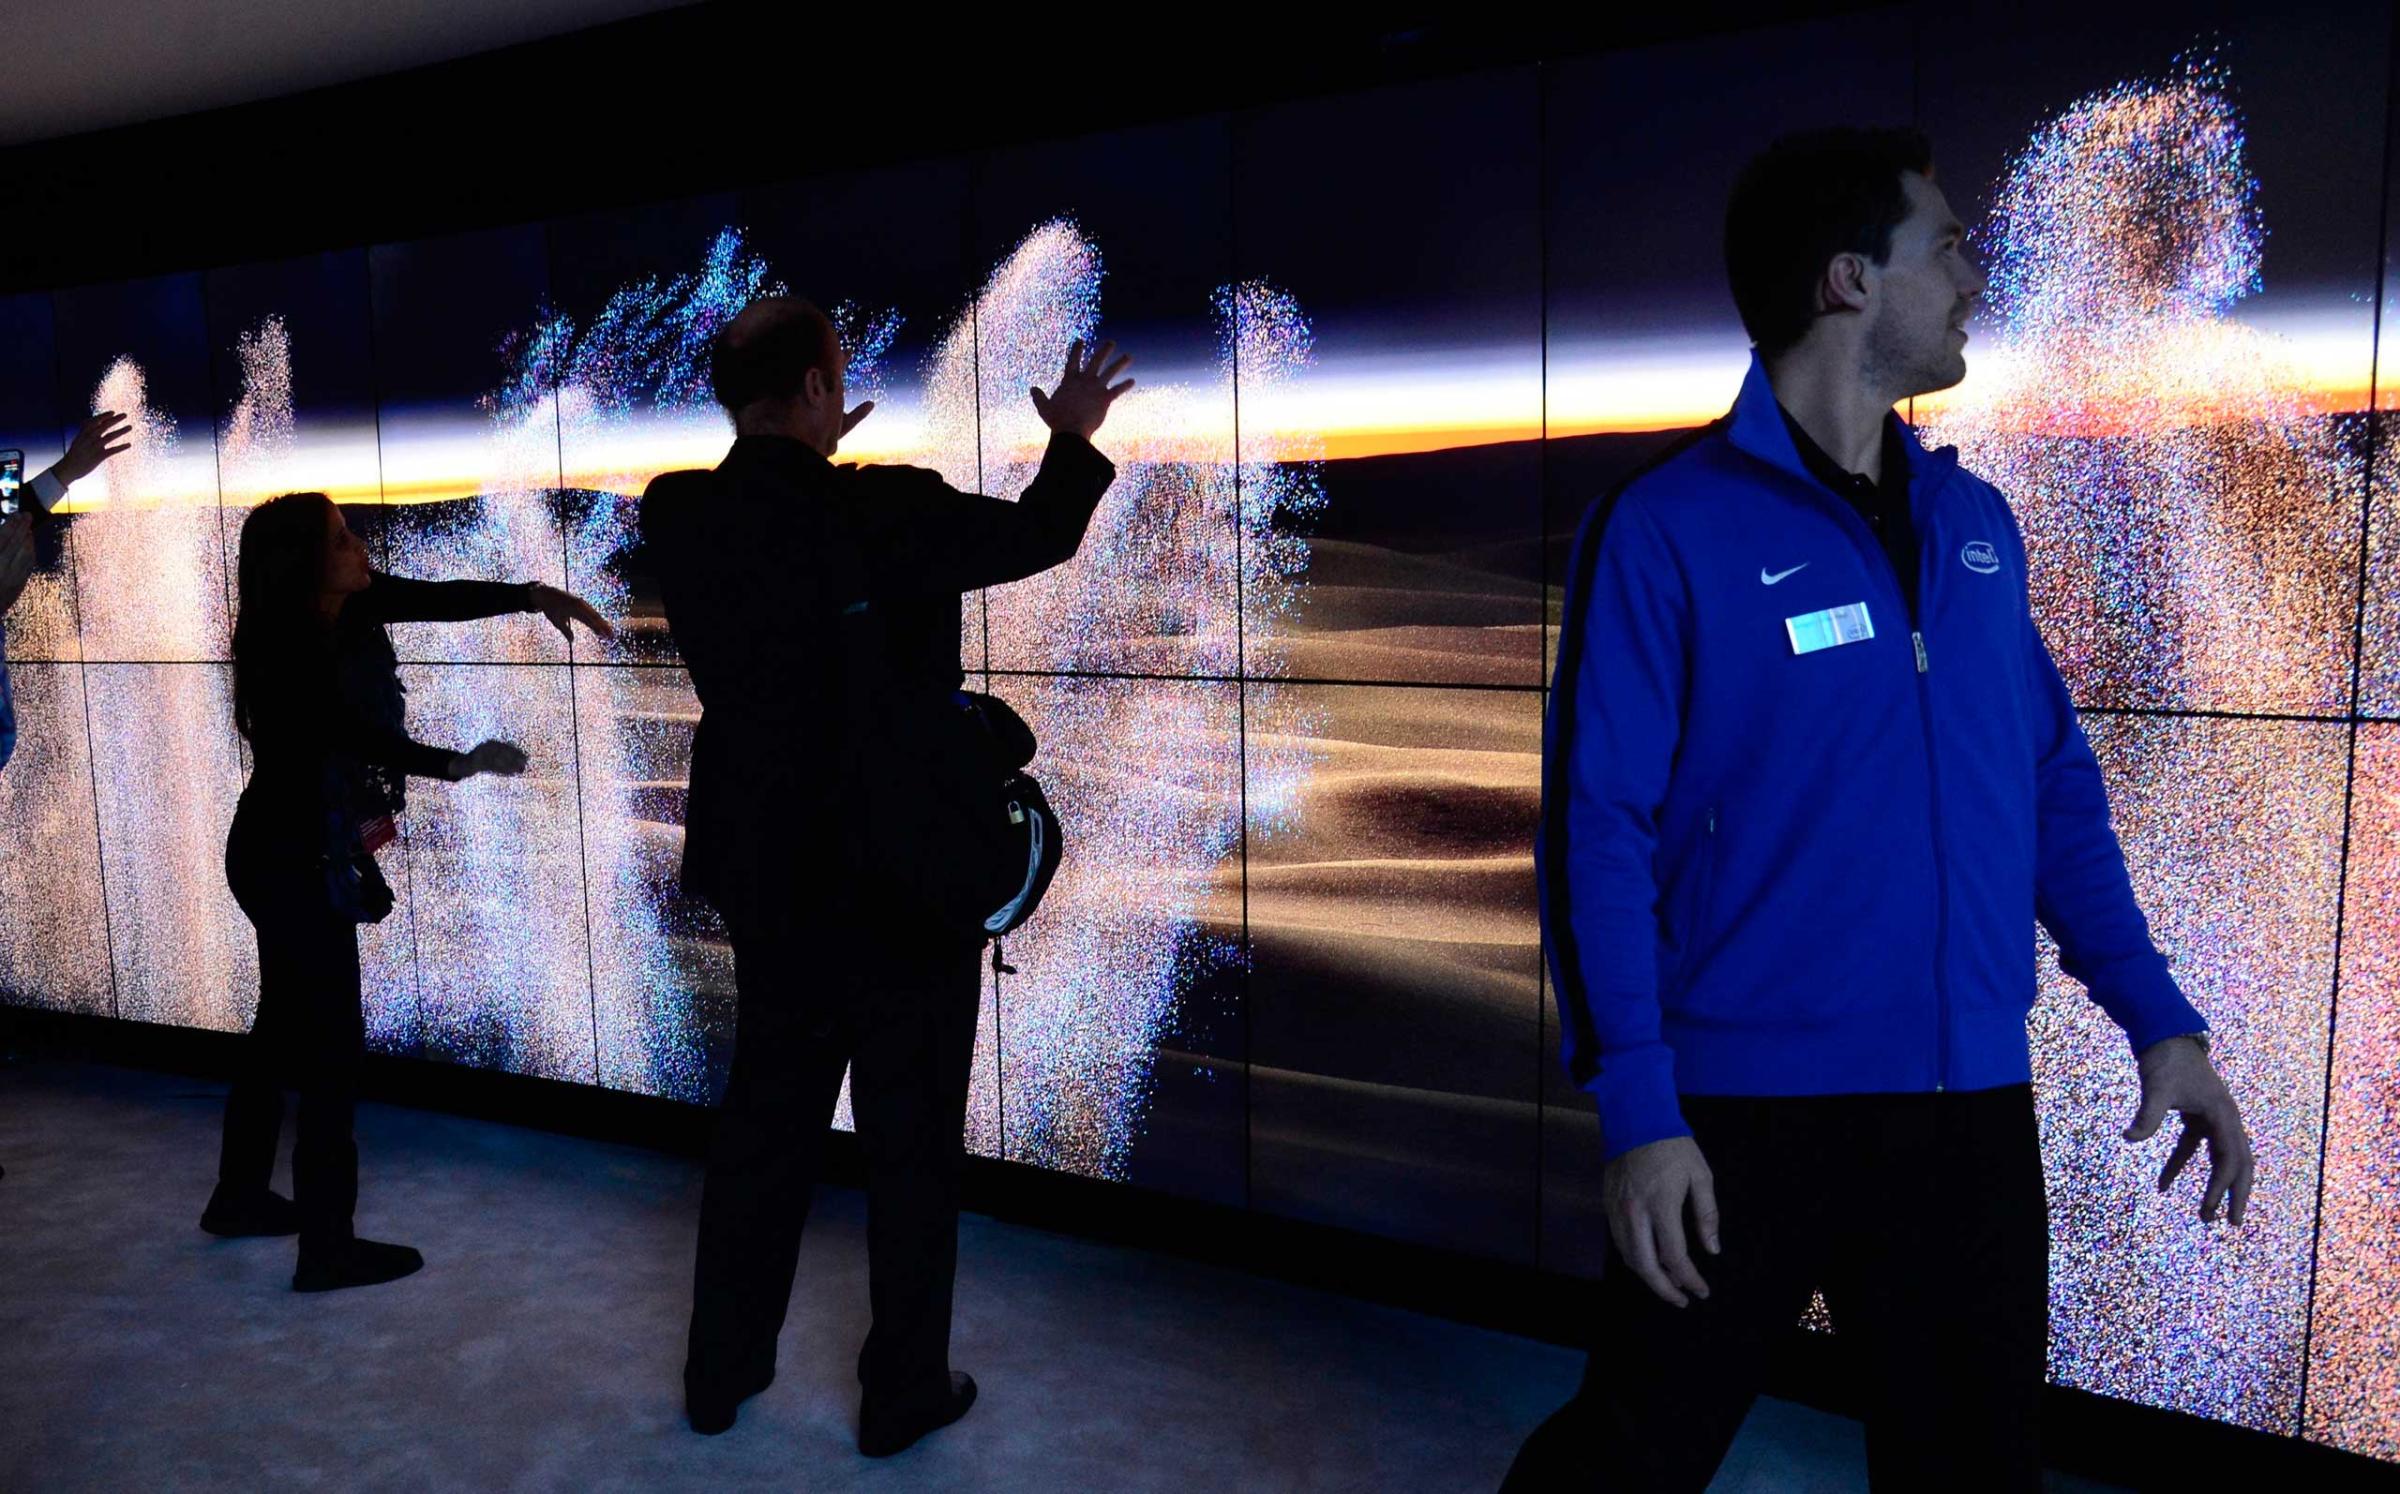 Attendees interact with wity screens that run on Intel's Realsense technology on Jan. 6, 2015.